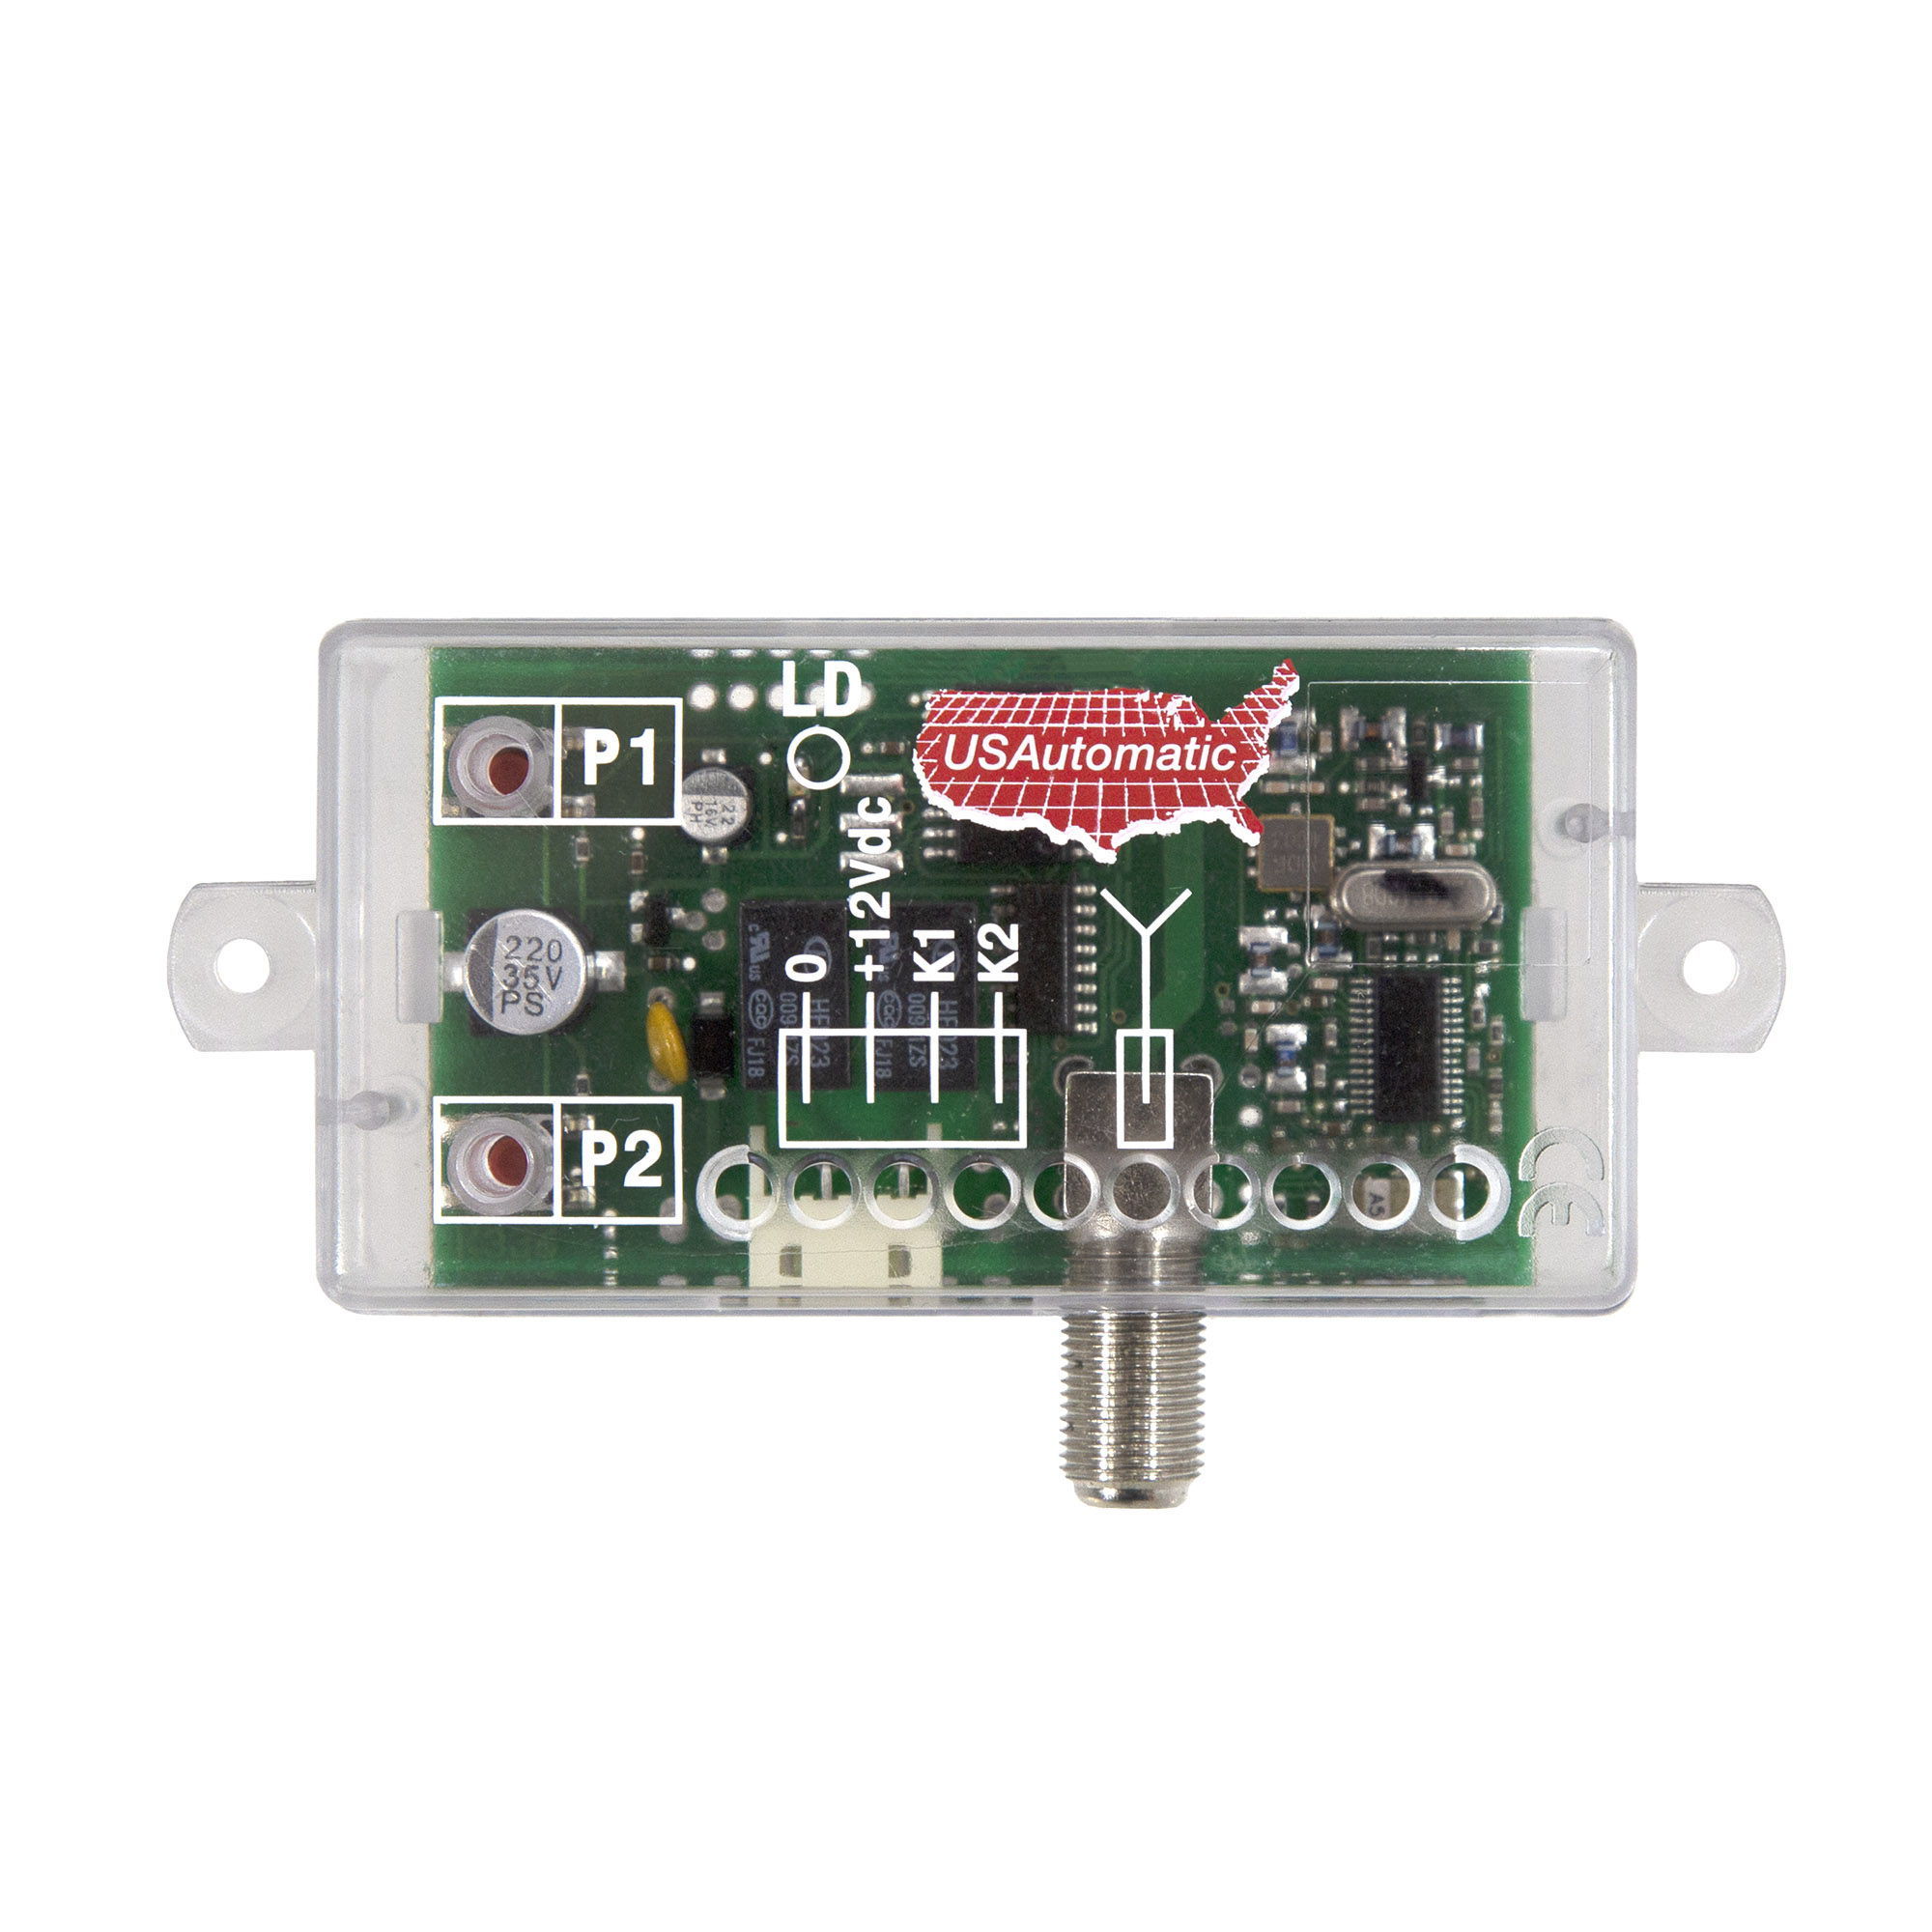 USAutomatic Receiver